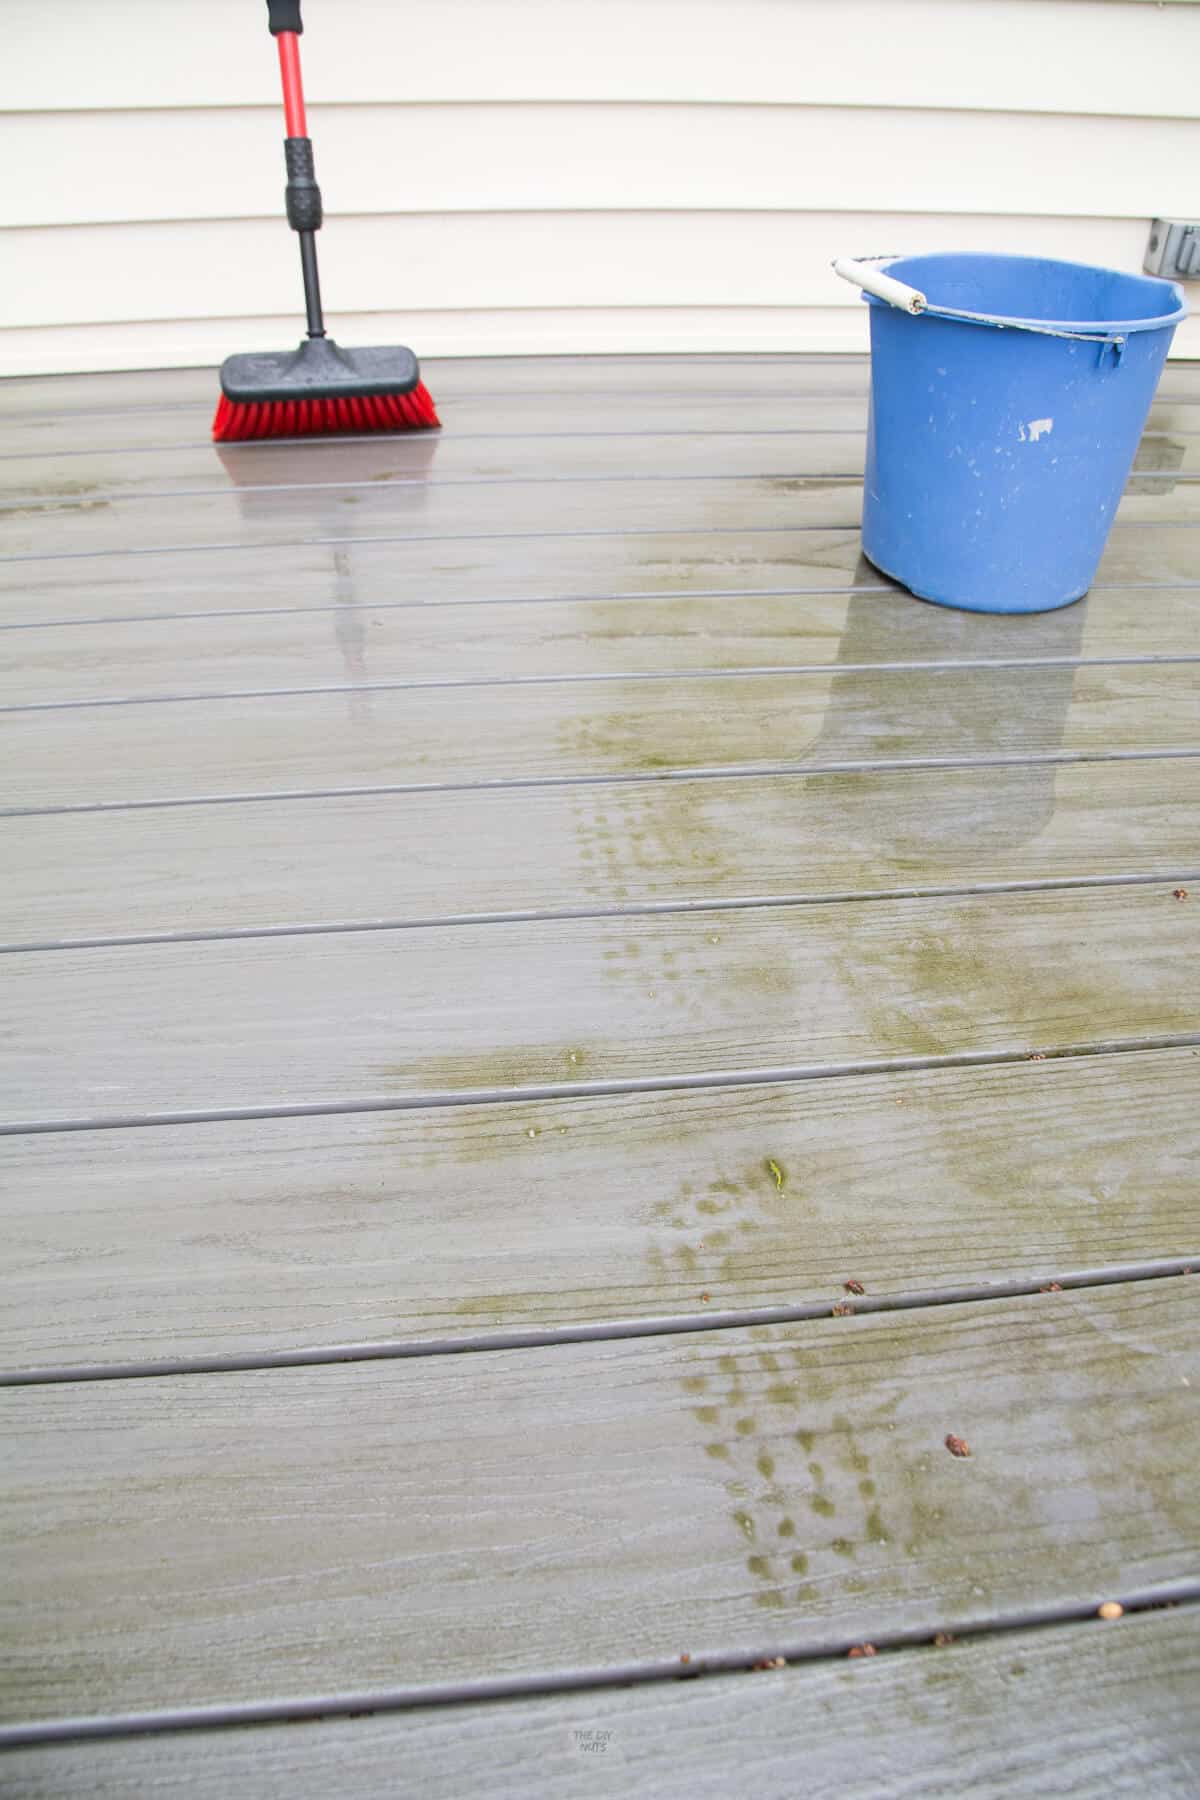 red brush showing clean path done with homemade deck cleaner.